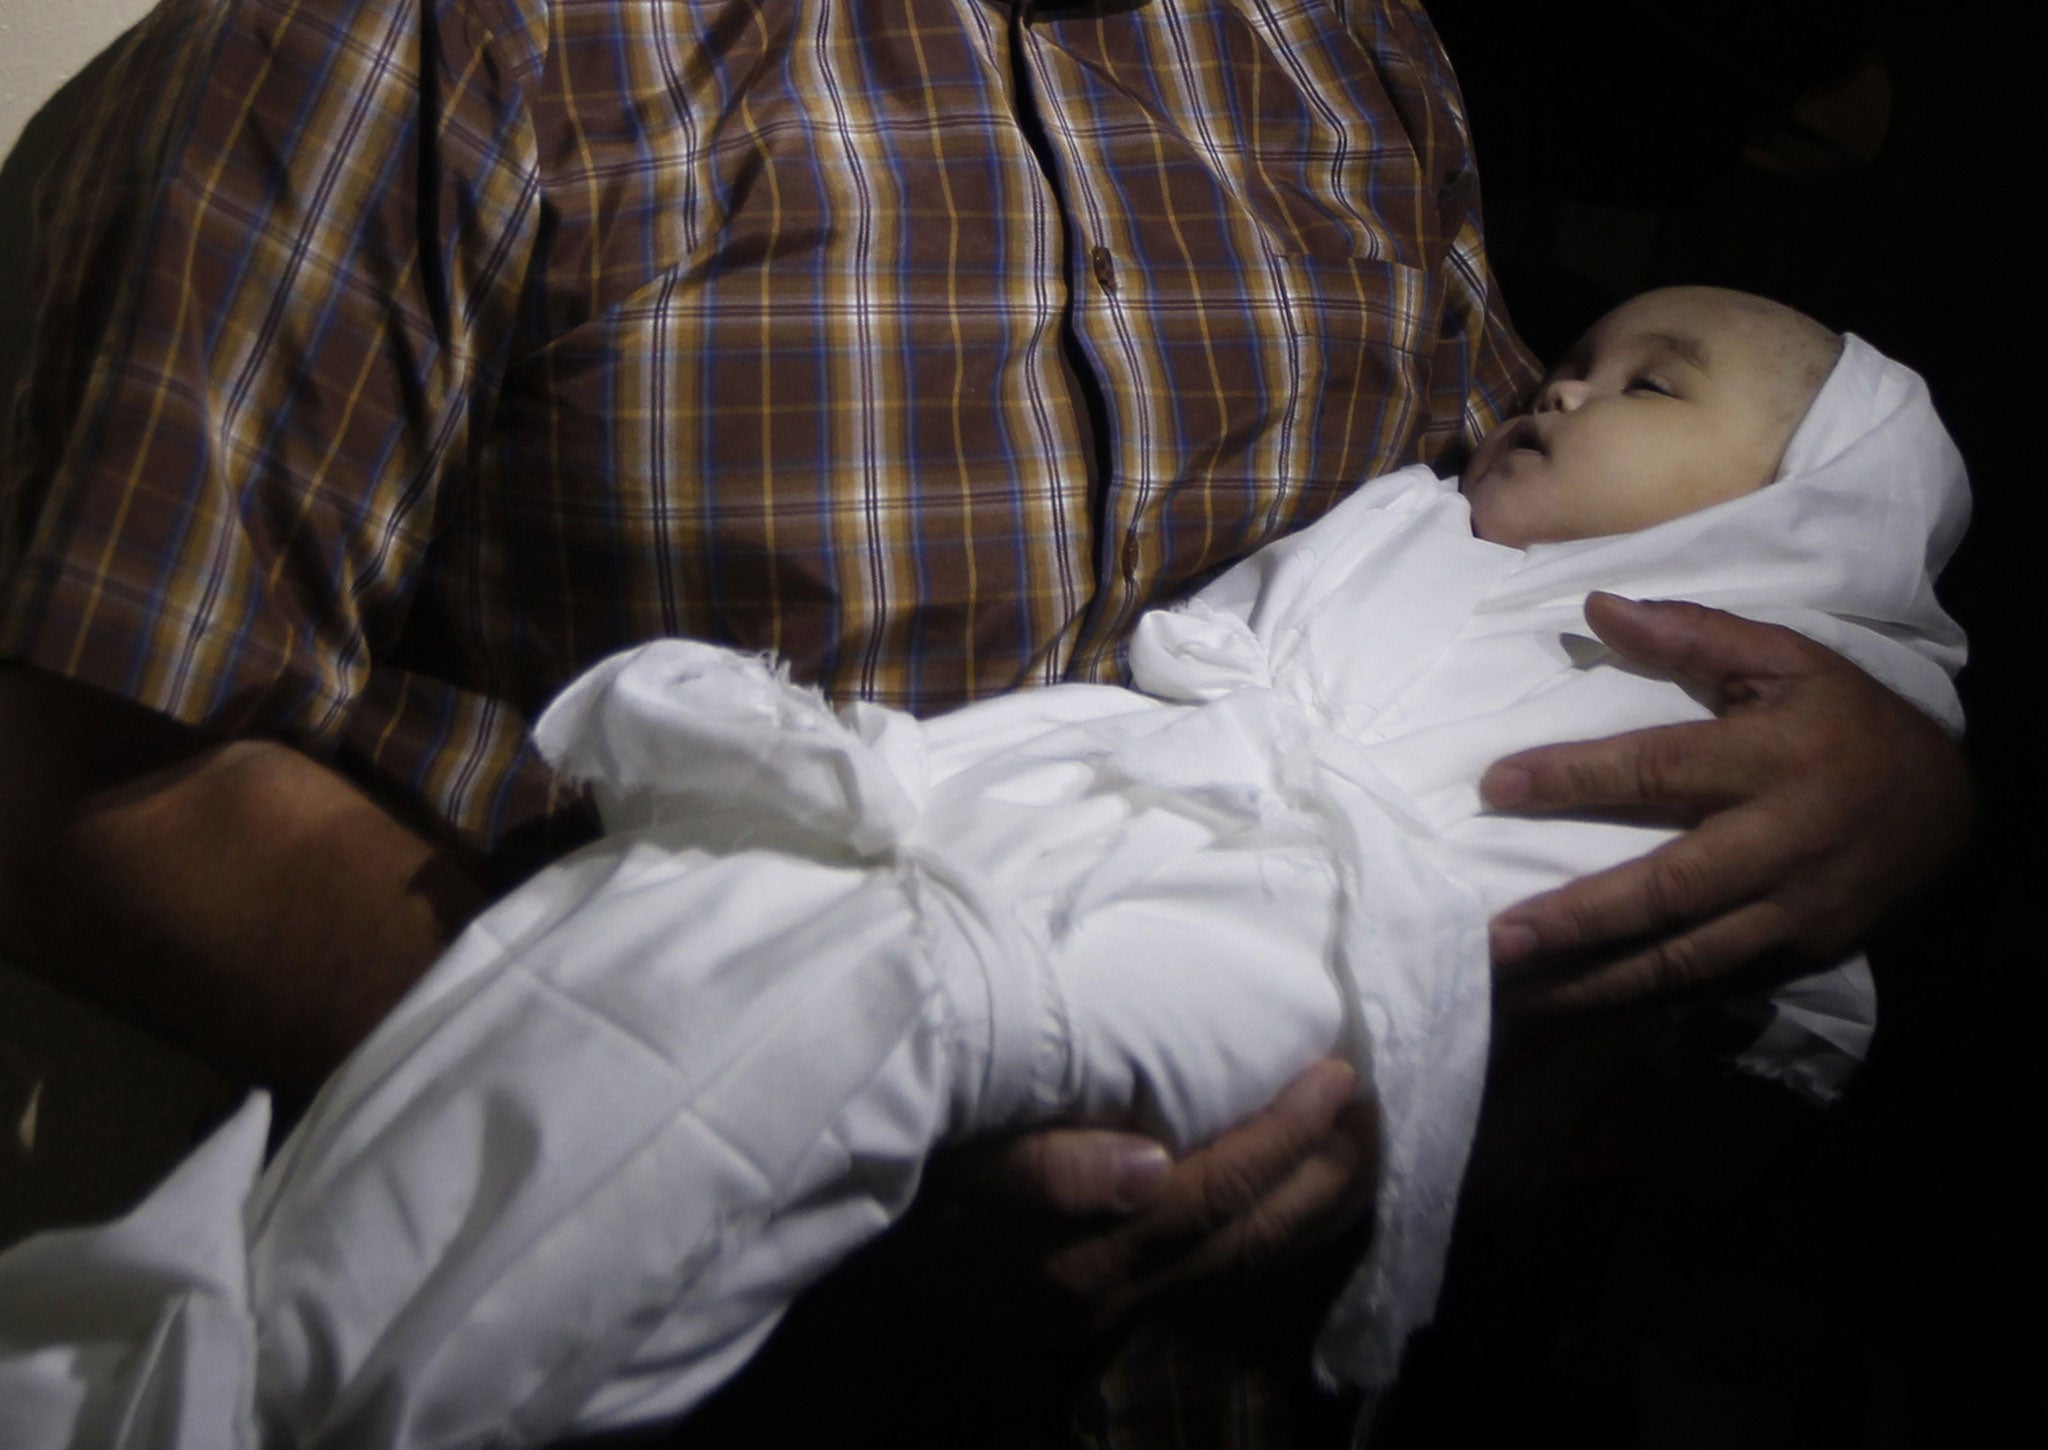 A Palestinian mourner carries the body of five-month-old girl Lama al-Satri after she was killed in an Israeli air strike the previous day, during her funeral in Rafah in the southern Gaza Strip